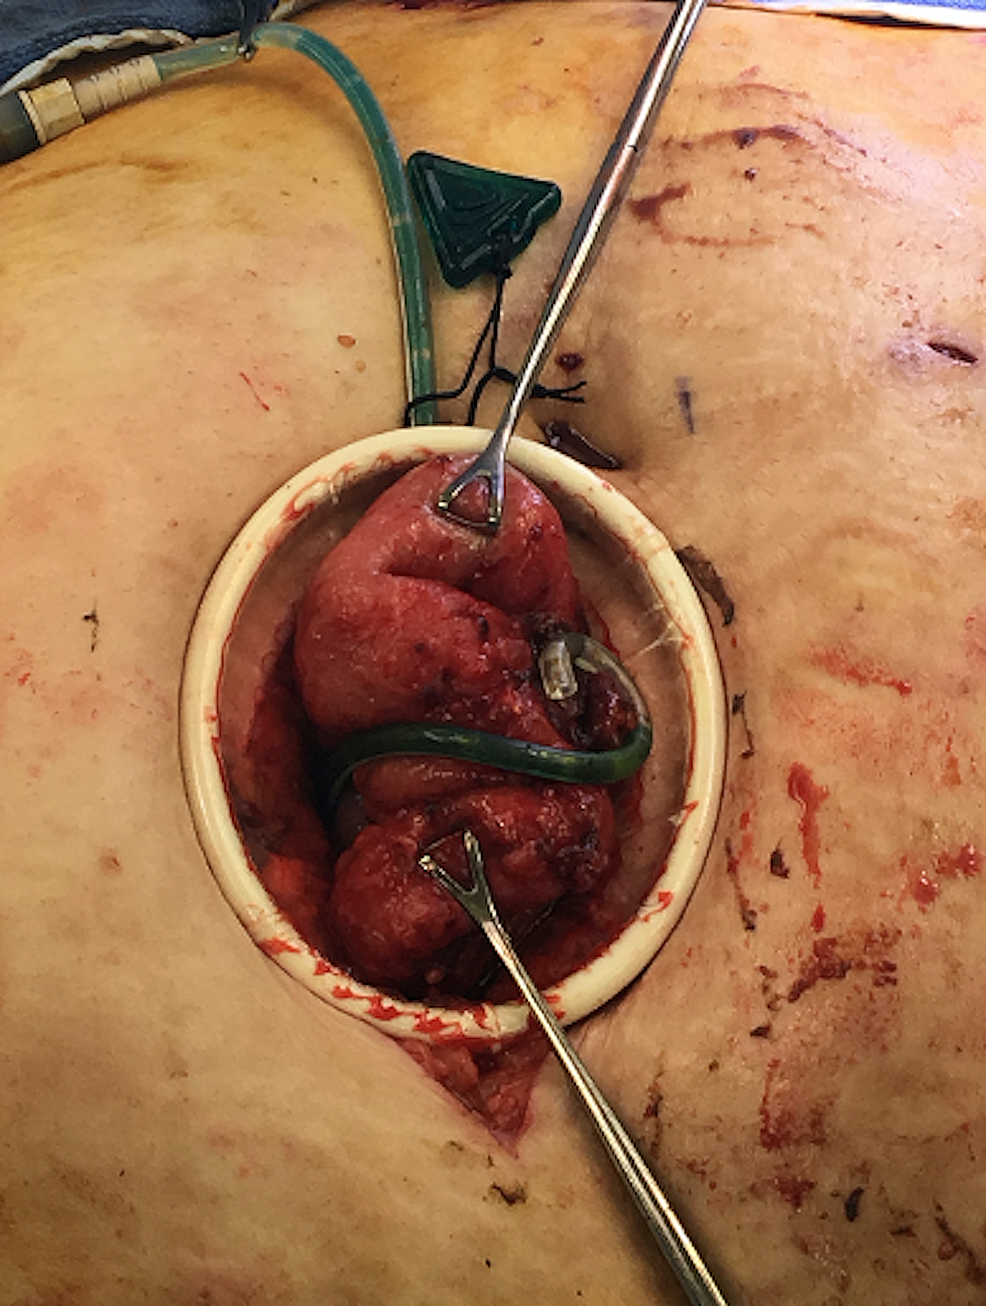 Exteriorization-of-the-eroded-catheter-and-affected-small-bowel-prior-to-removal,-resection-and-anastomosis.